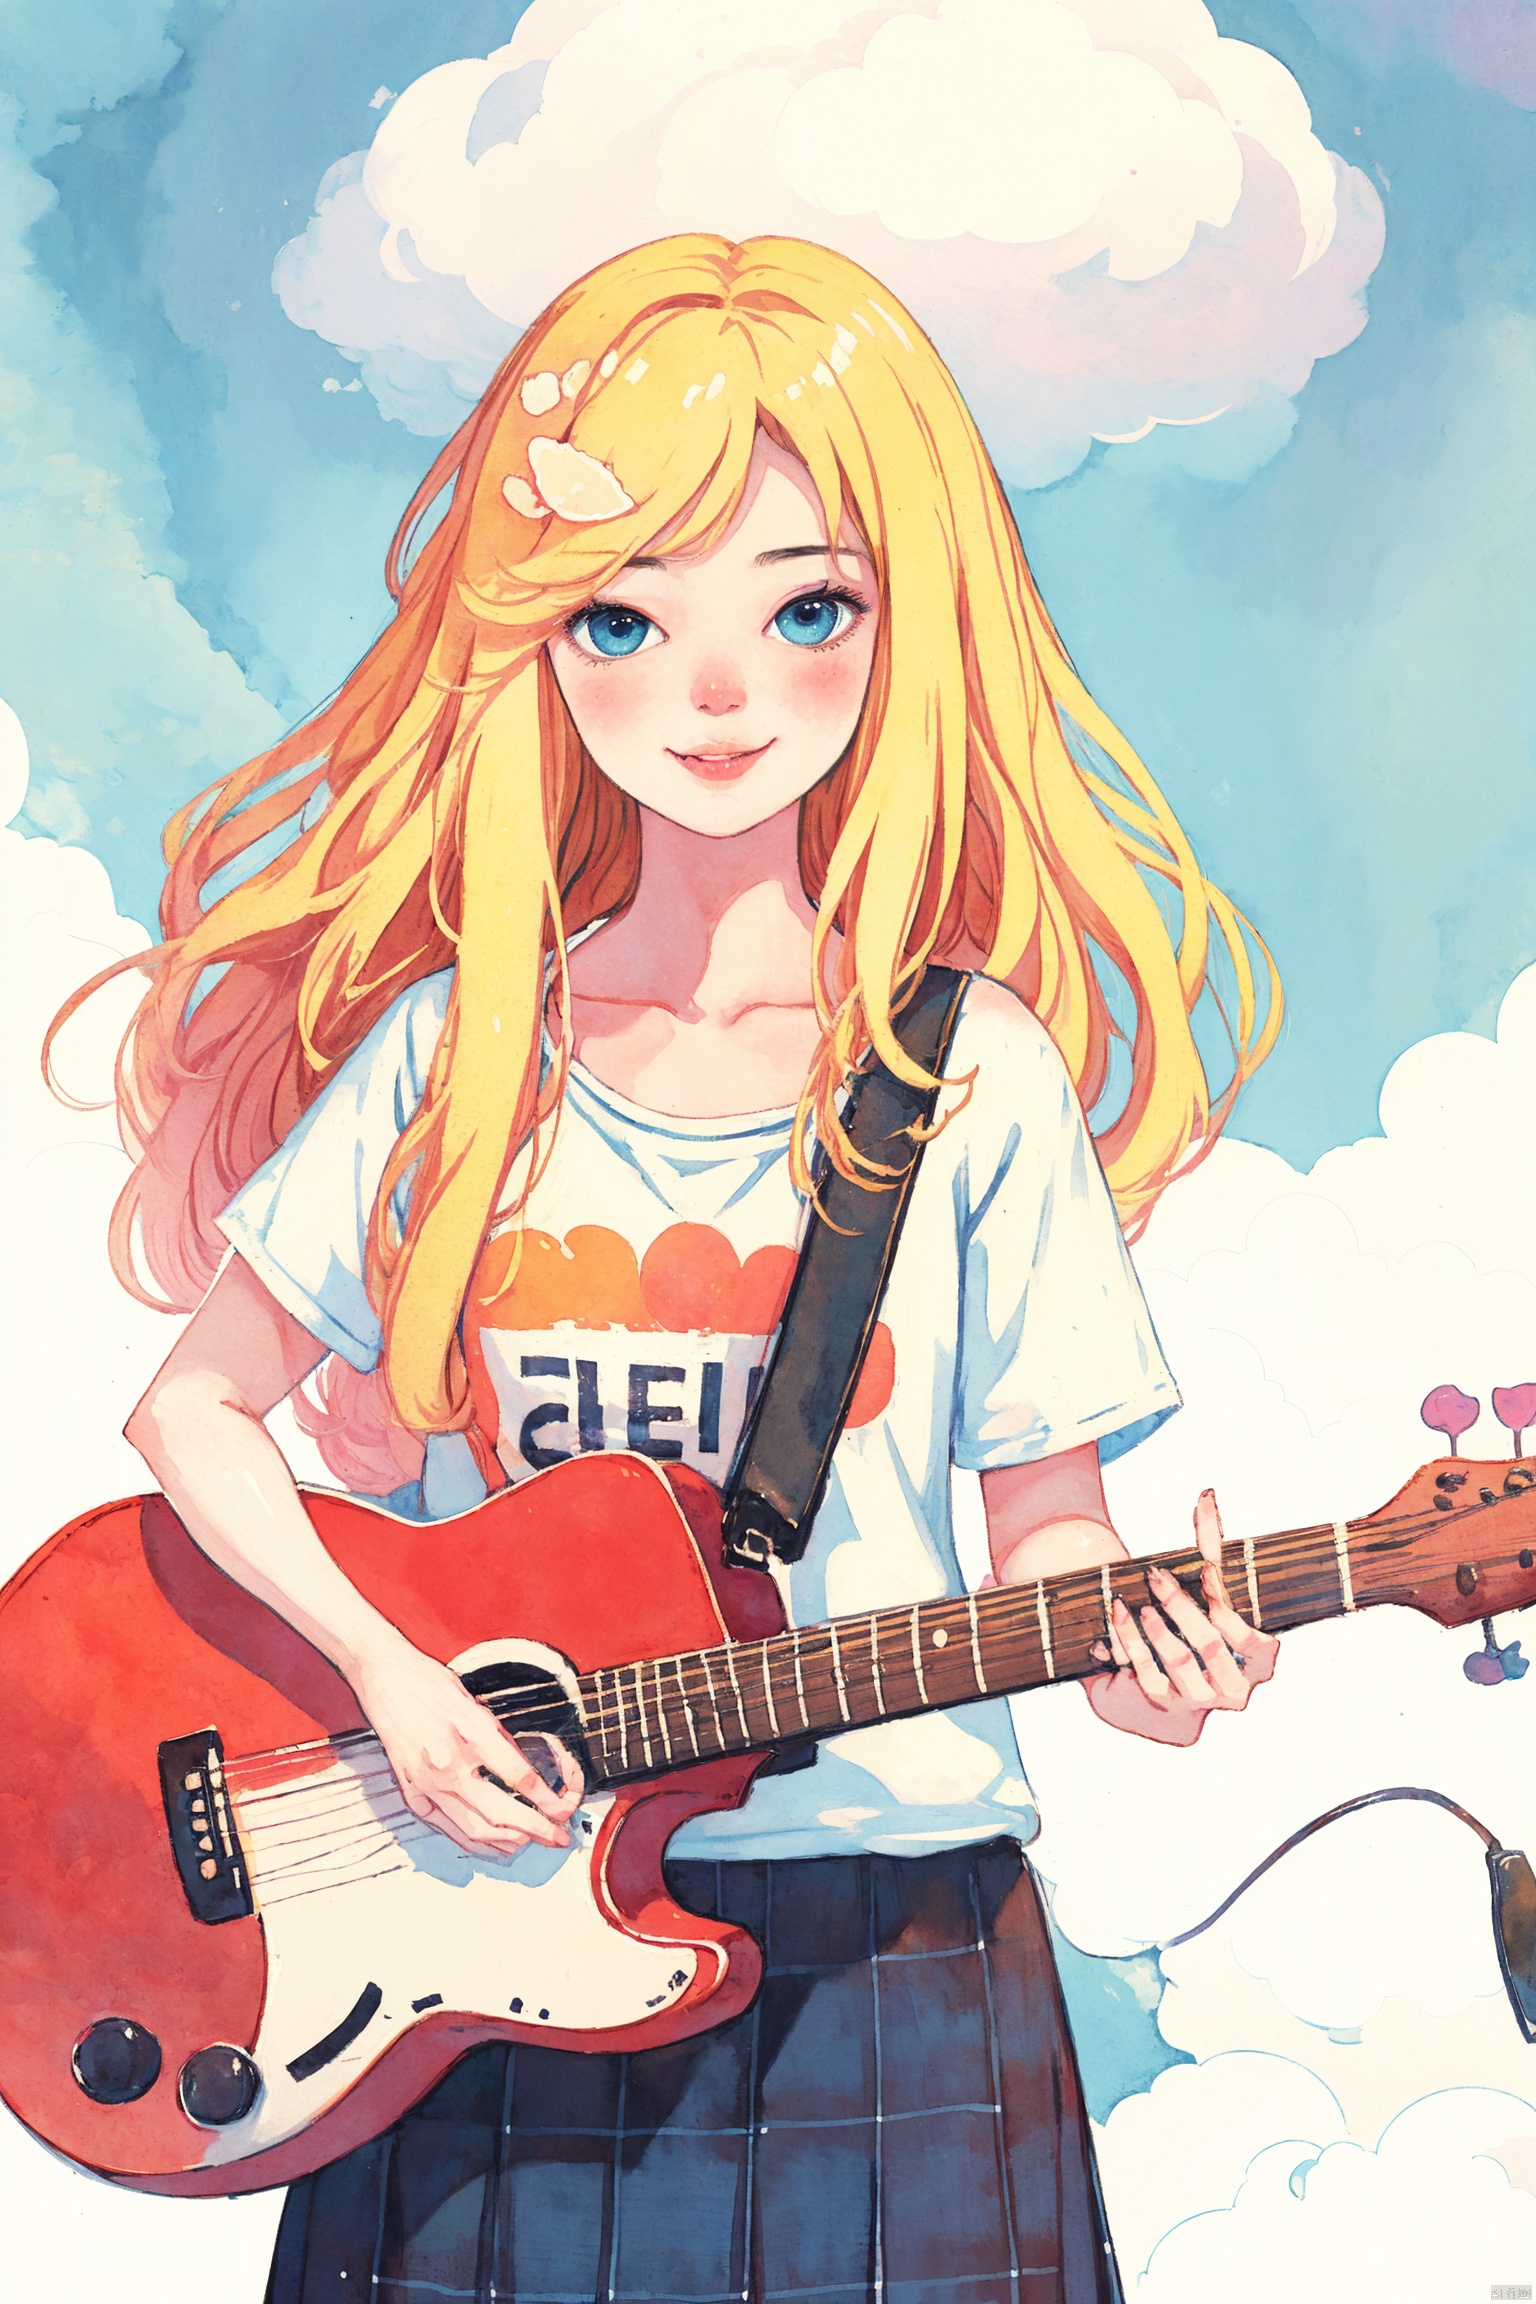  A girl with long blonde hair and blue eyes poses in front of a camera, wearing a white shirt and a black skirt. She has a cute smile and a mole on her left cheek. She holds a microphone in her right hand and a guitar in her left hand. She is a singer-songwriter who loves music and dreams of becoming a star. She is Nμ, a character from the anime "Love Live! Nijigasaki High School Idol Club", CGArt Illustrator